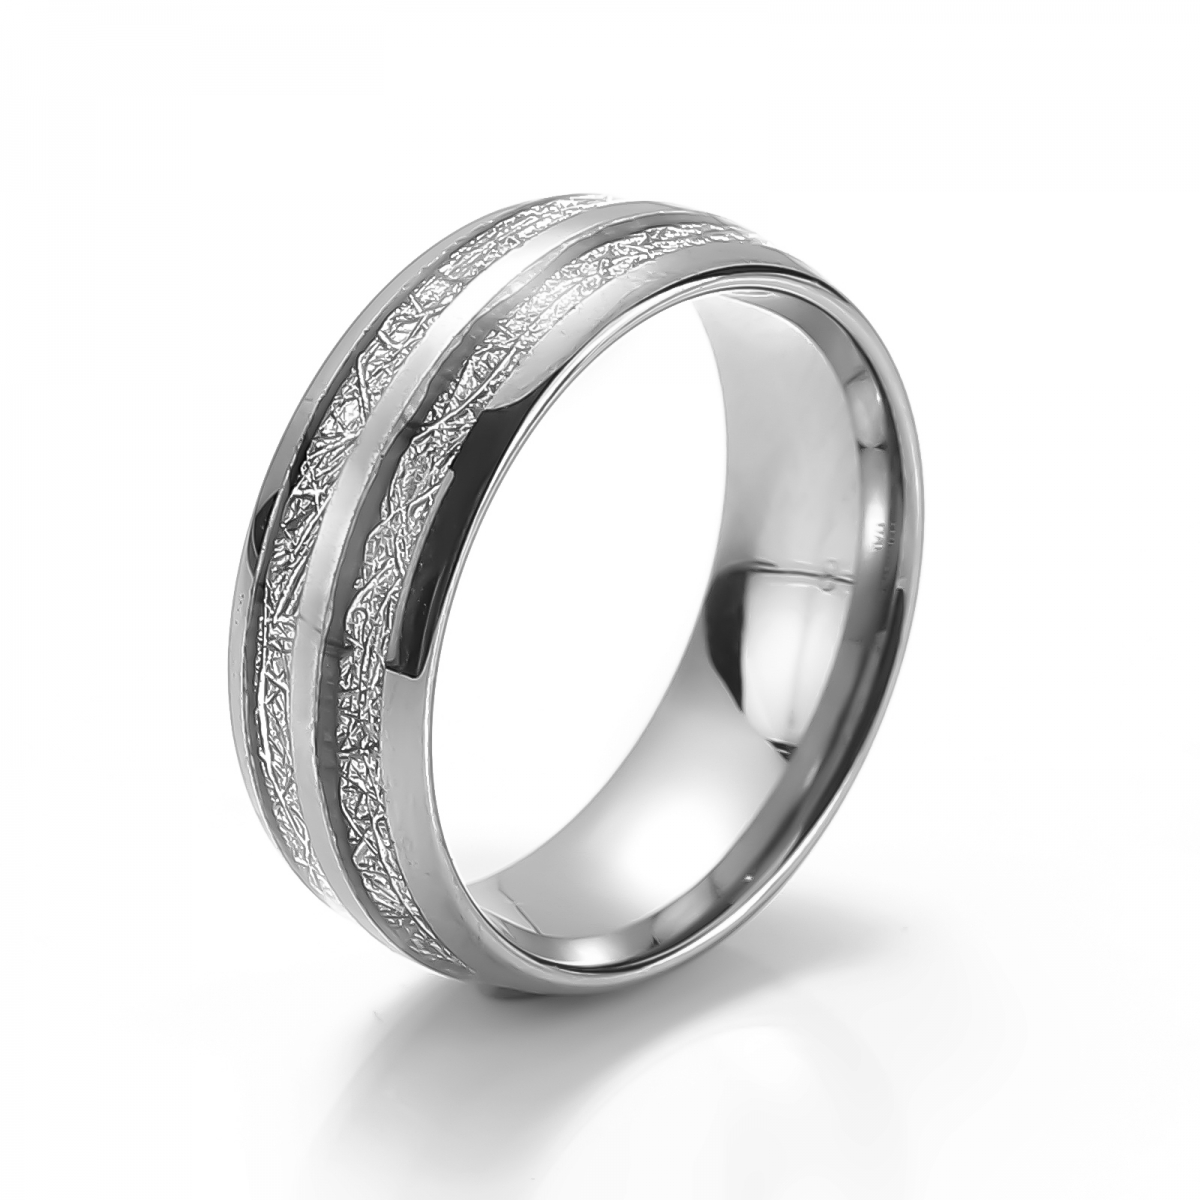 Tungsten Carbide Ring US$5.6/PC-NORSECOLLECTION- Viking Jewelry,Viking Necklace,Viking Bracelet,Viking Rings,Viking Mugs,Viking Accessories,Viking Crafts